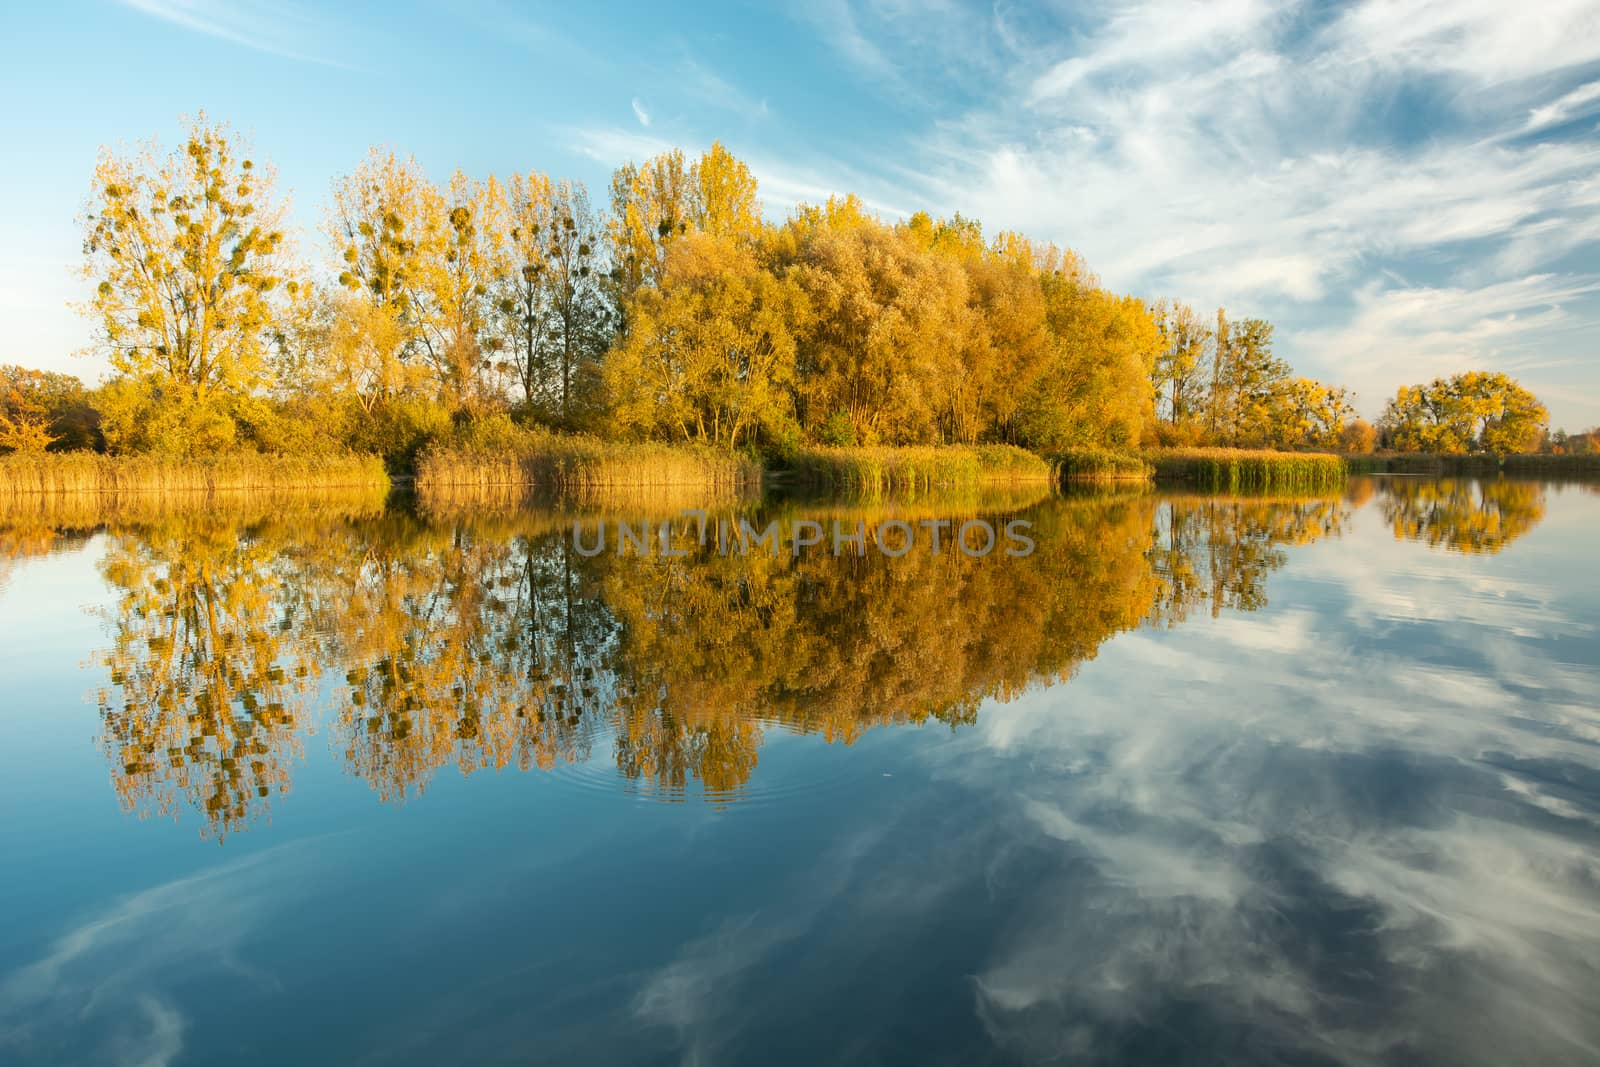 Autumn trees and clouds reflected in the lake water by darekb22